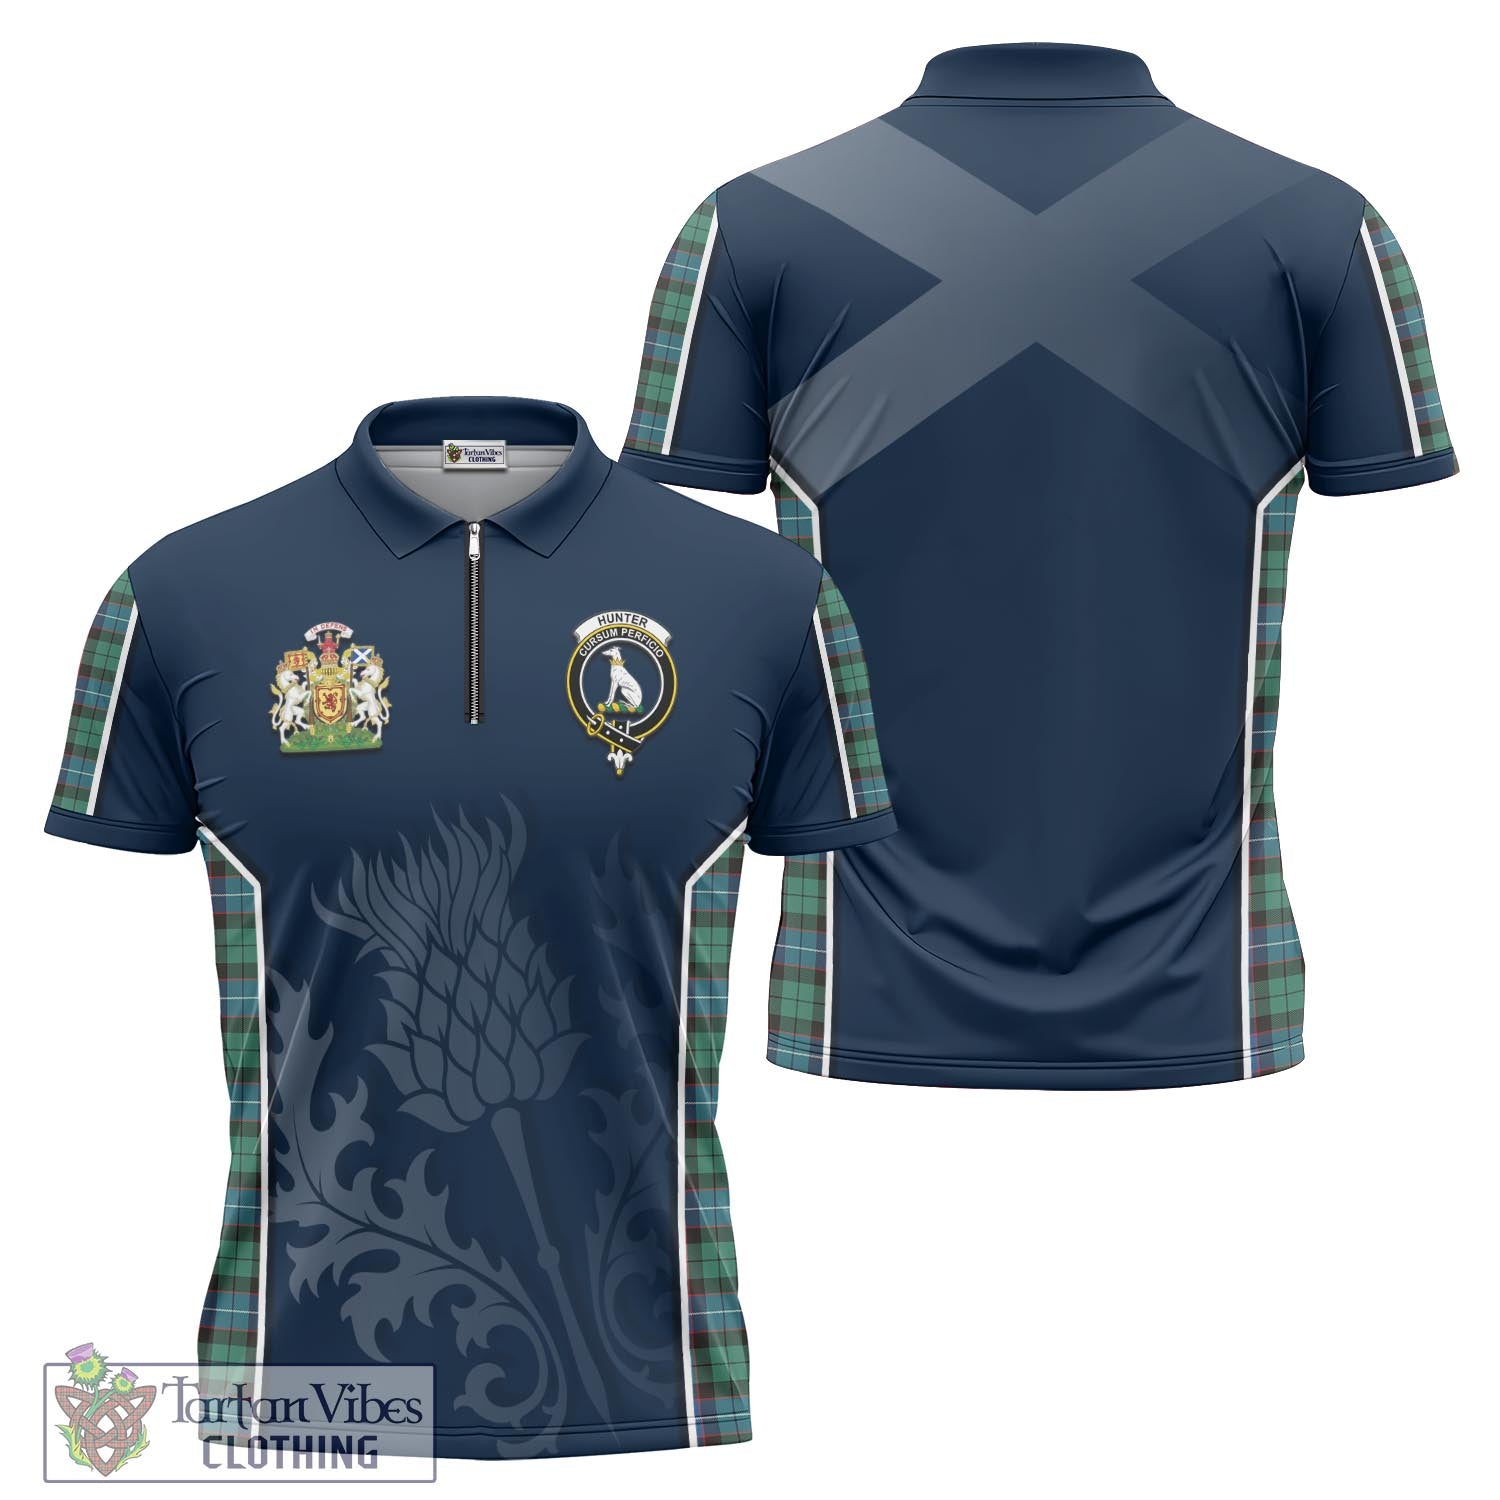 Tartan Vibes Clothing Hunter Ancient Tartan Zipper Polo Shirt with Family Crest and Scottish Thistle Vibes Sport Style